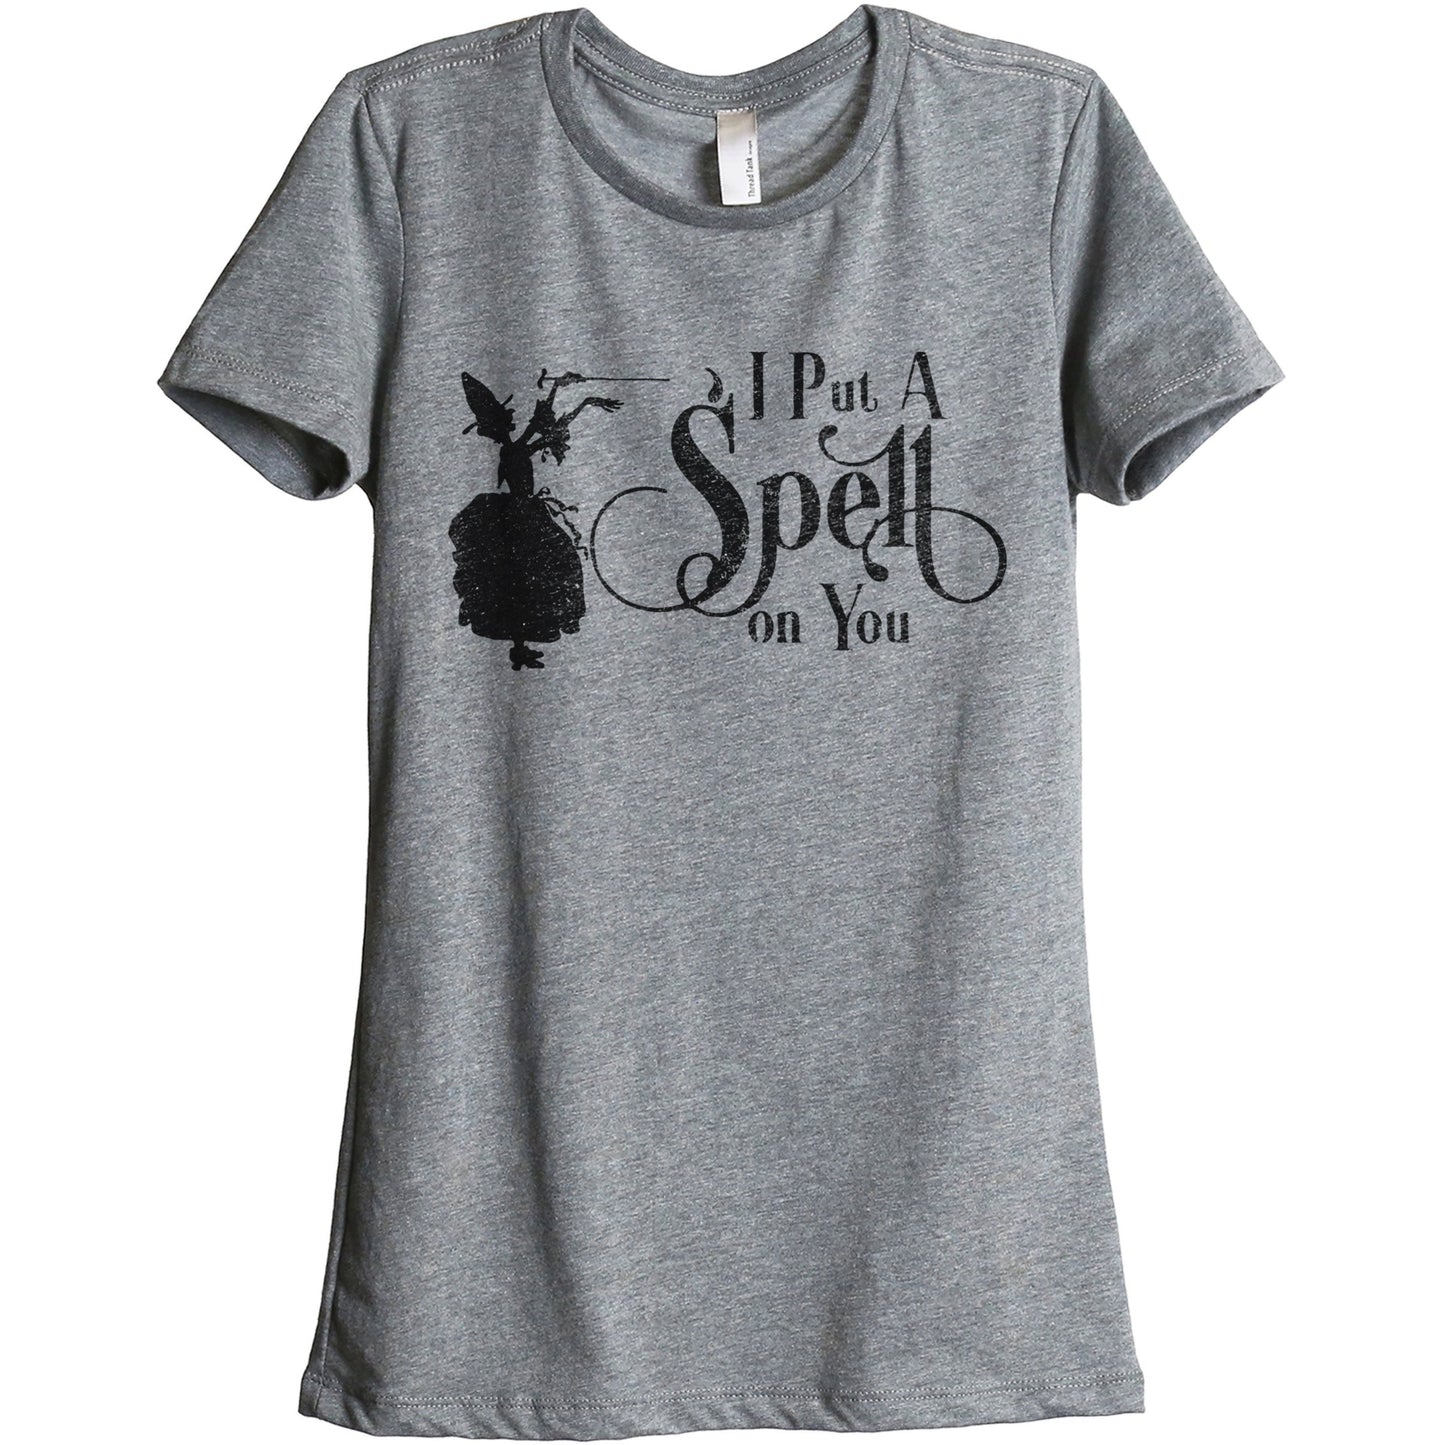 I Put A Spell On You - thread tank | Stories you can wear.